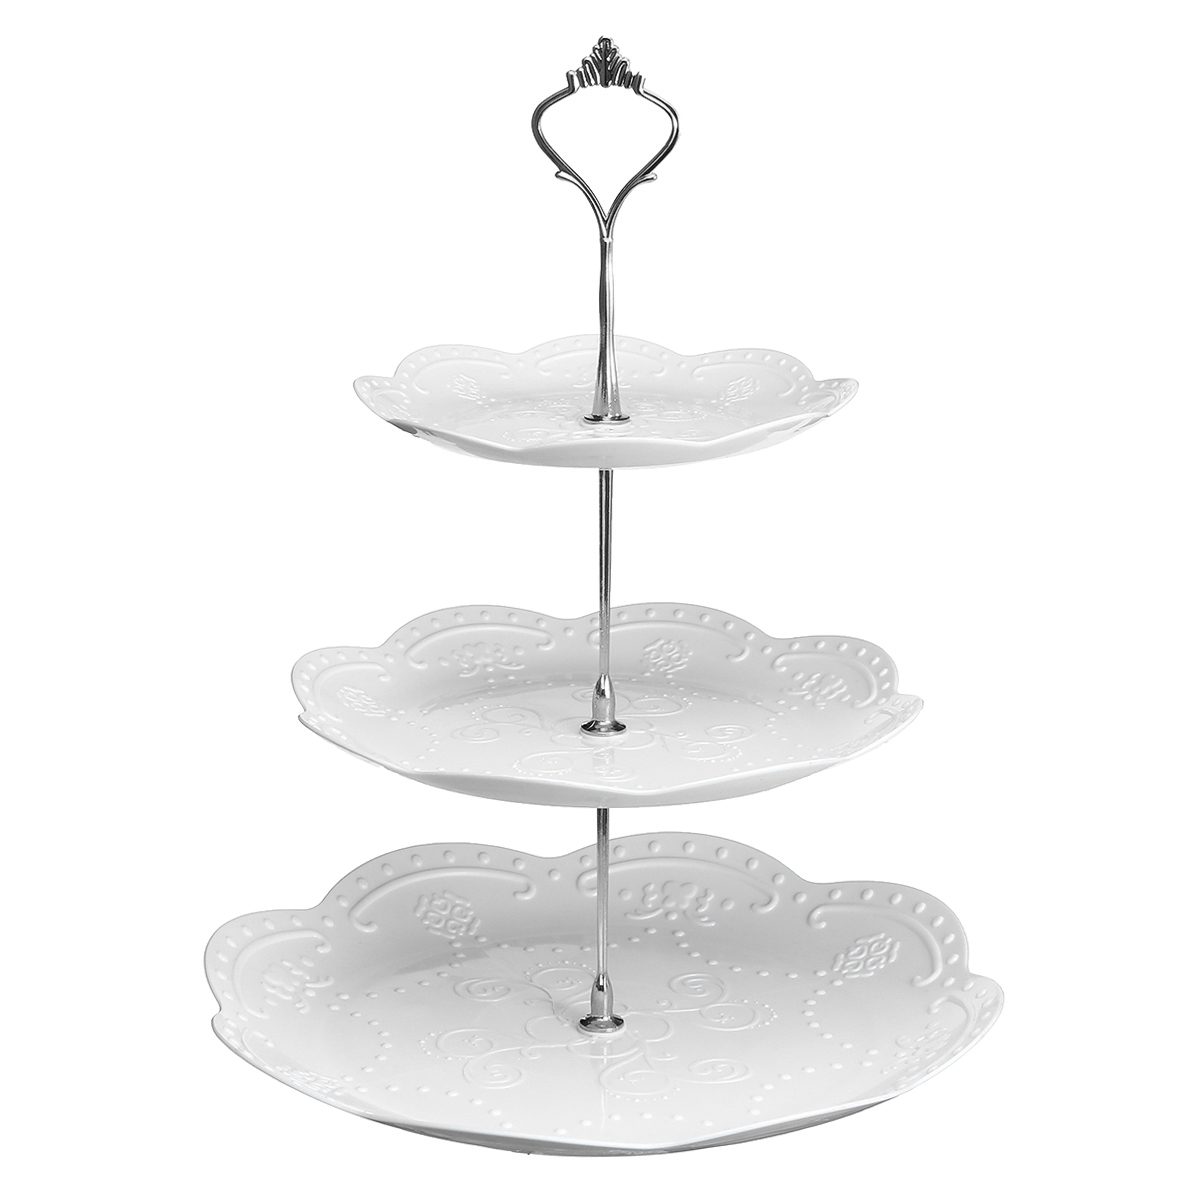 European-style-23-Tier-Fruit-Plate-Dessert-Tray-Cake-Table-Multi-layer-Cake-Stand-Cake-Setting-Table-1926348-11